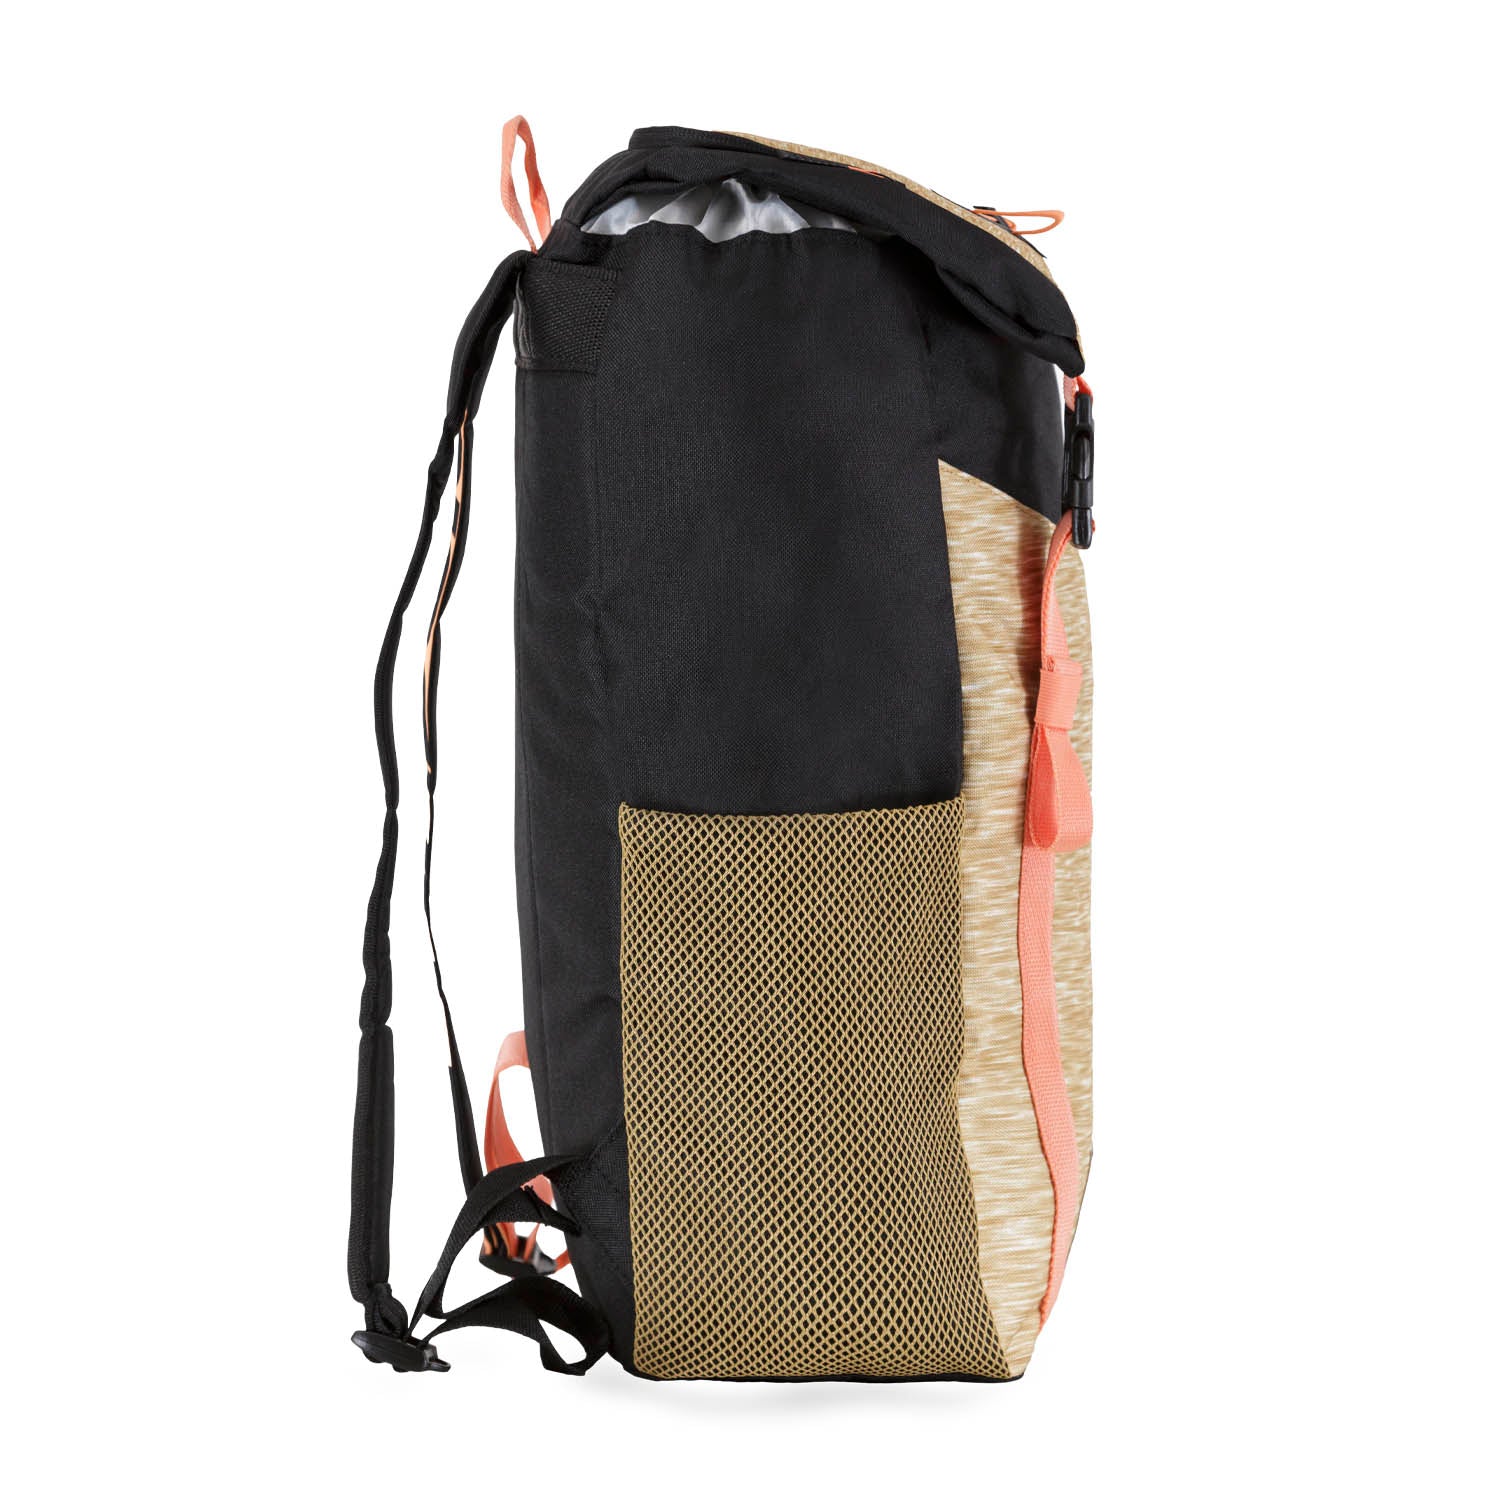 Babolat Classic Backpack Black/Beige - Right